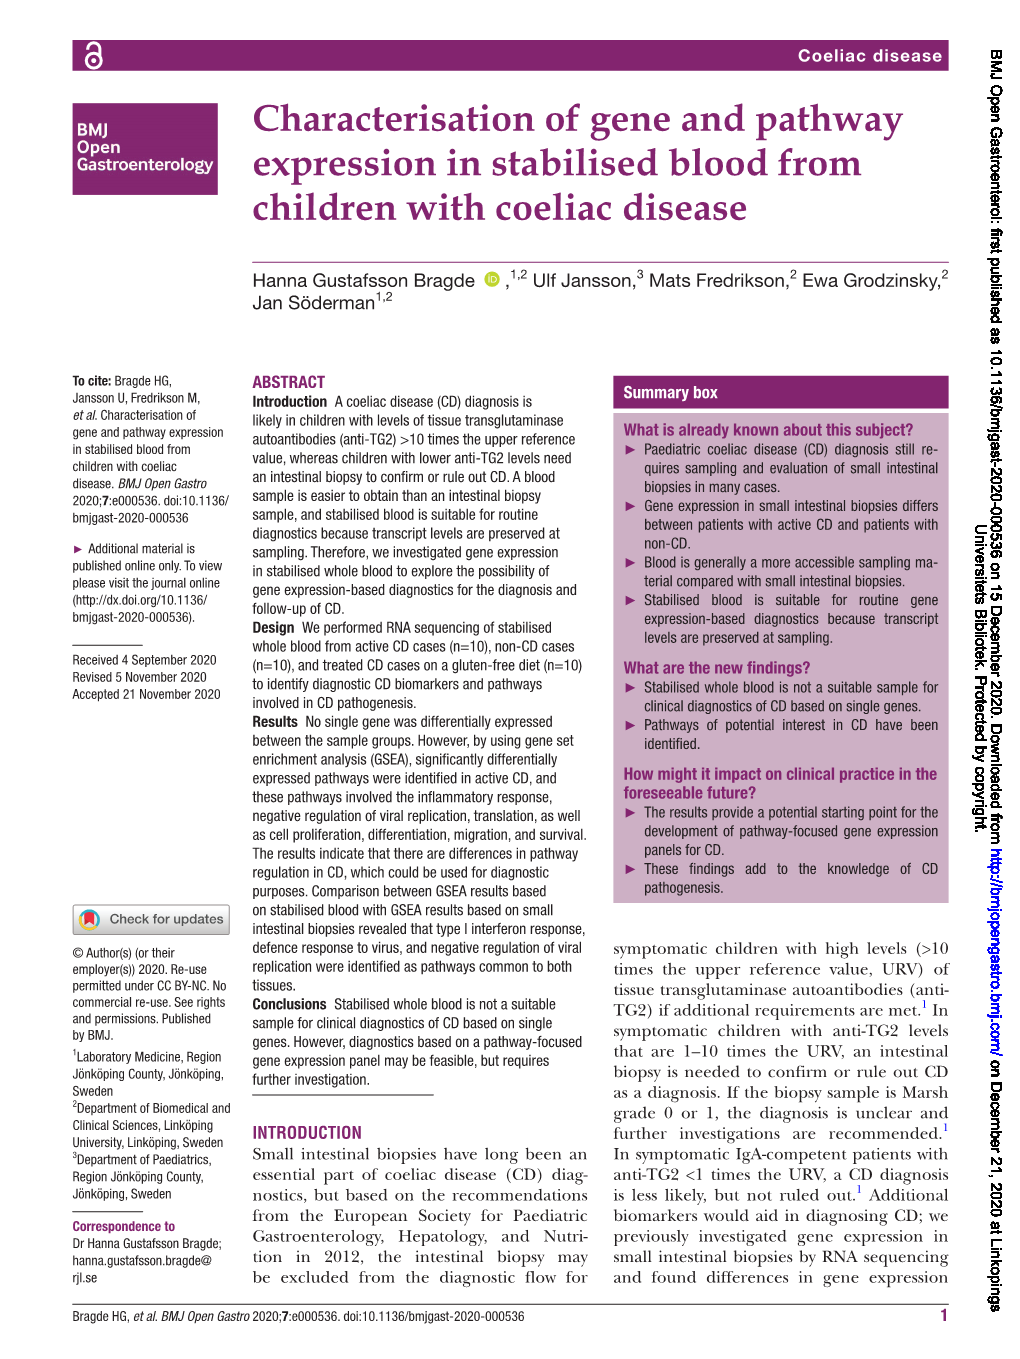 Characterisation of Gene and Pathway Expression in Stabilised Blood from Children with Coeliac Disease